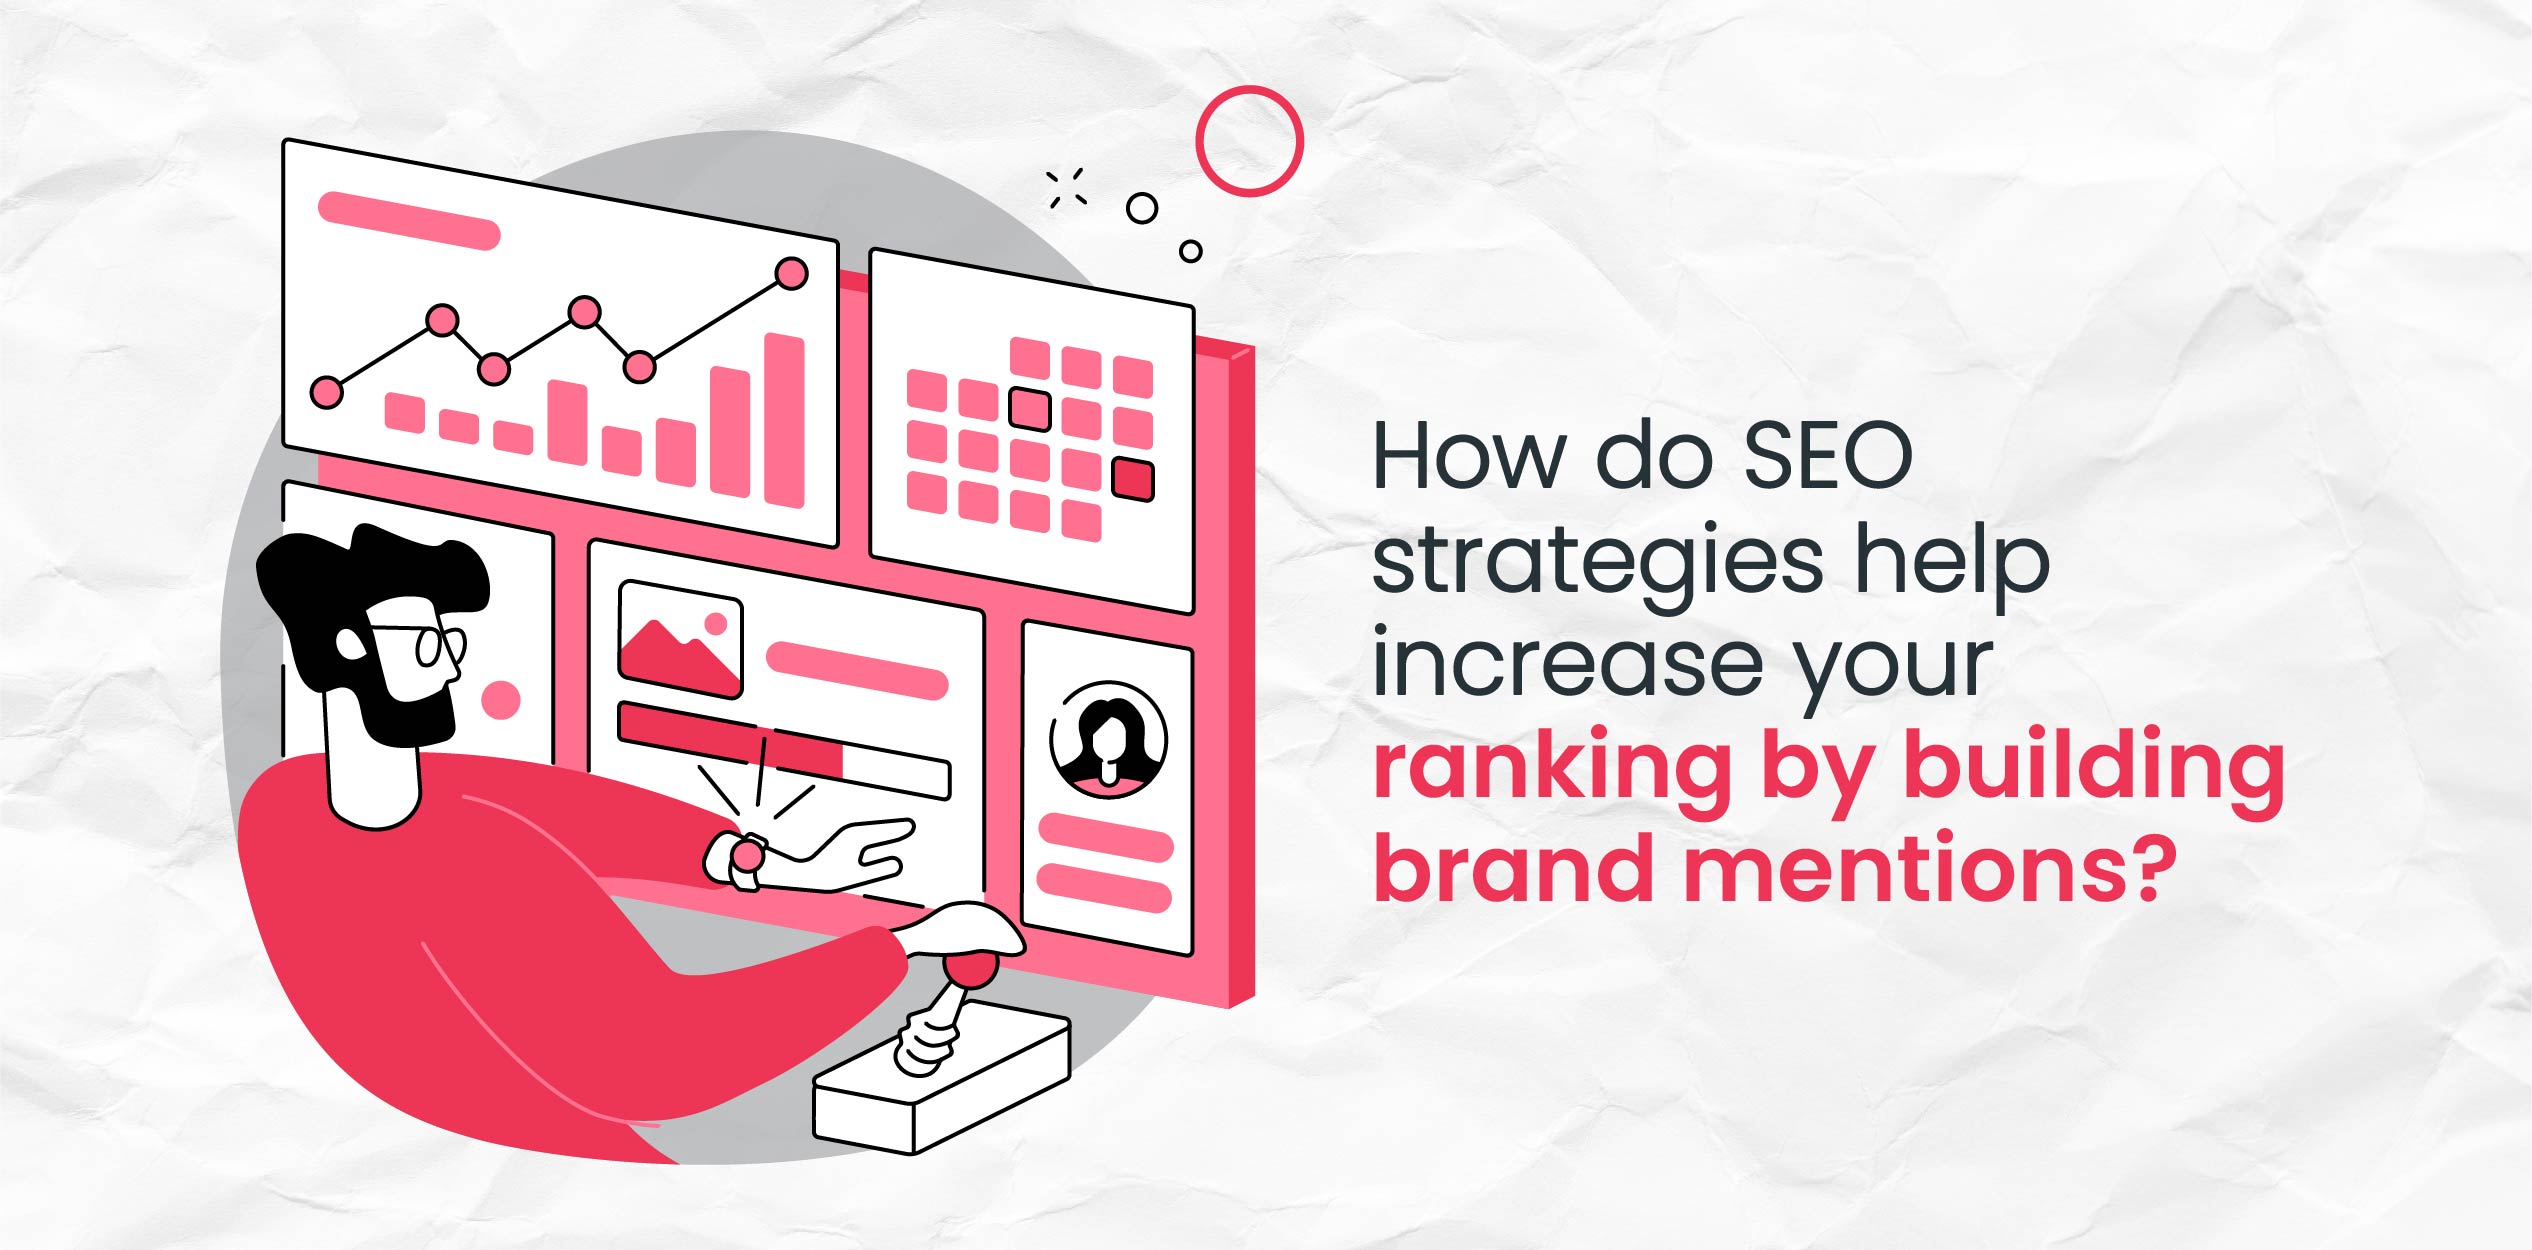 How do SEO strategies help increase your ranking by building brand mentions?